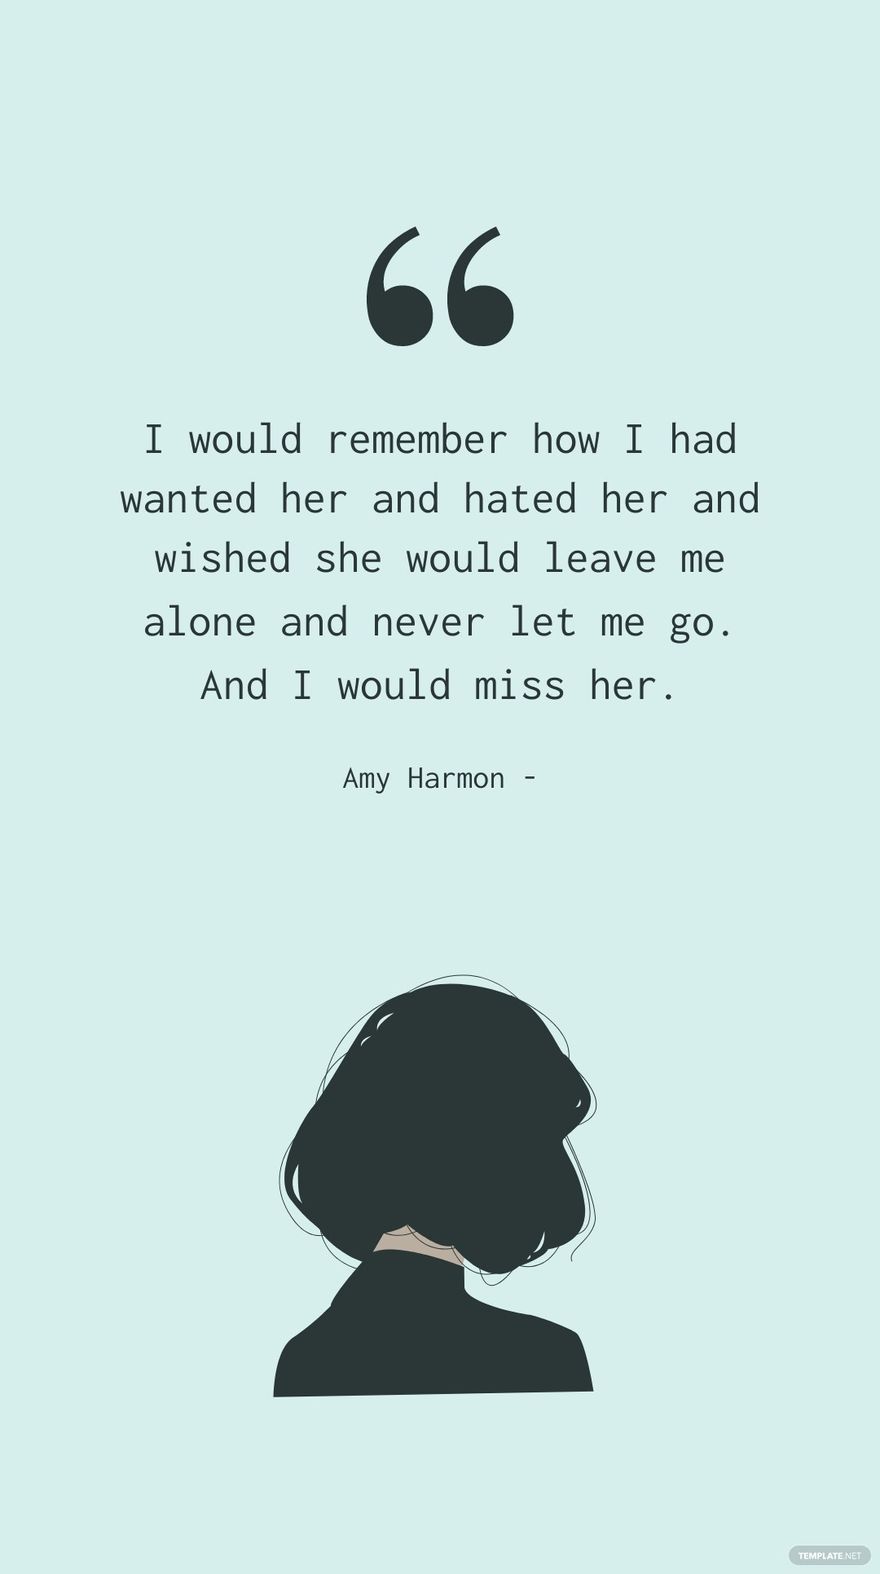 Amy Harmon - I would remember how I had wanted her and hated her and wished she would leave me alone and never let me go. And I would miss her.